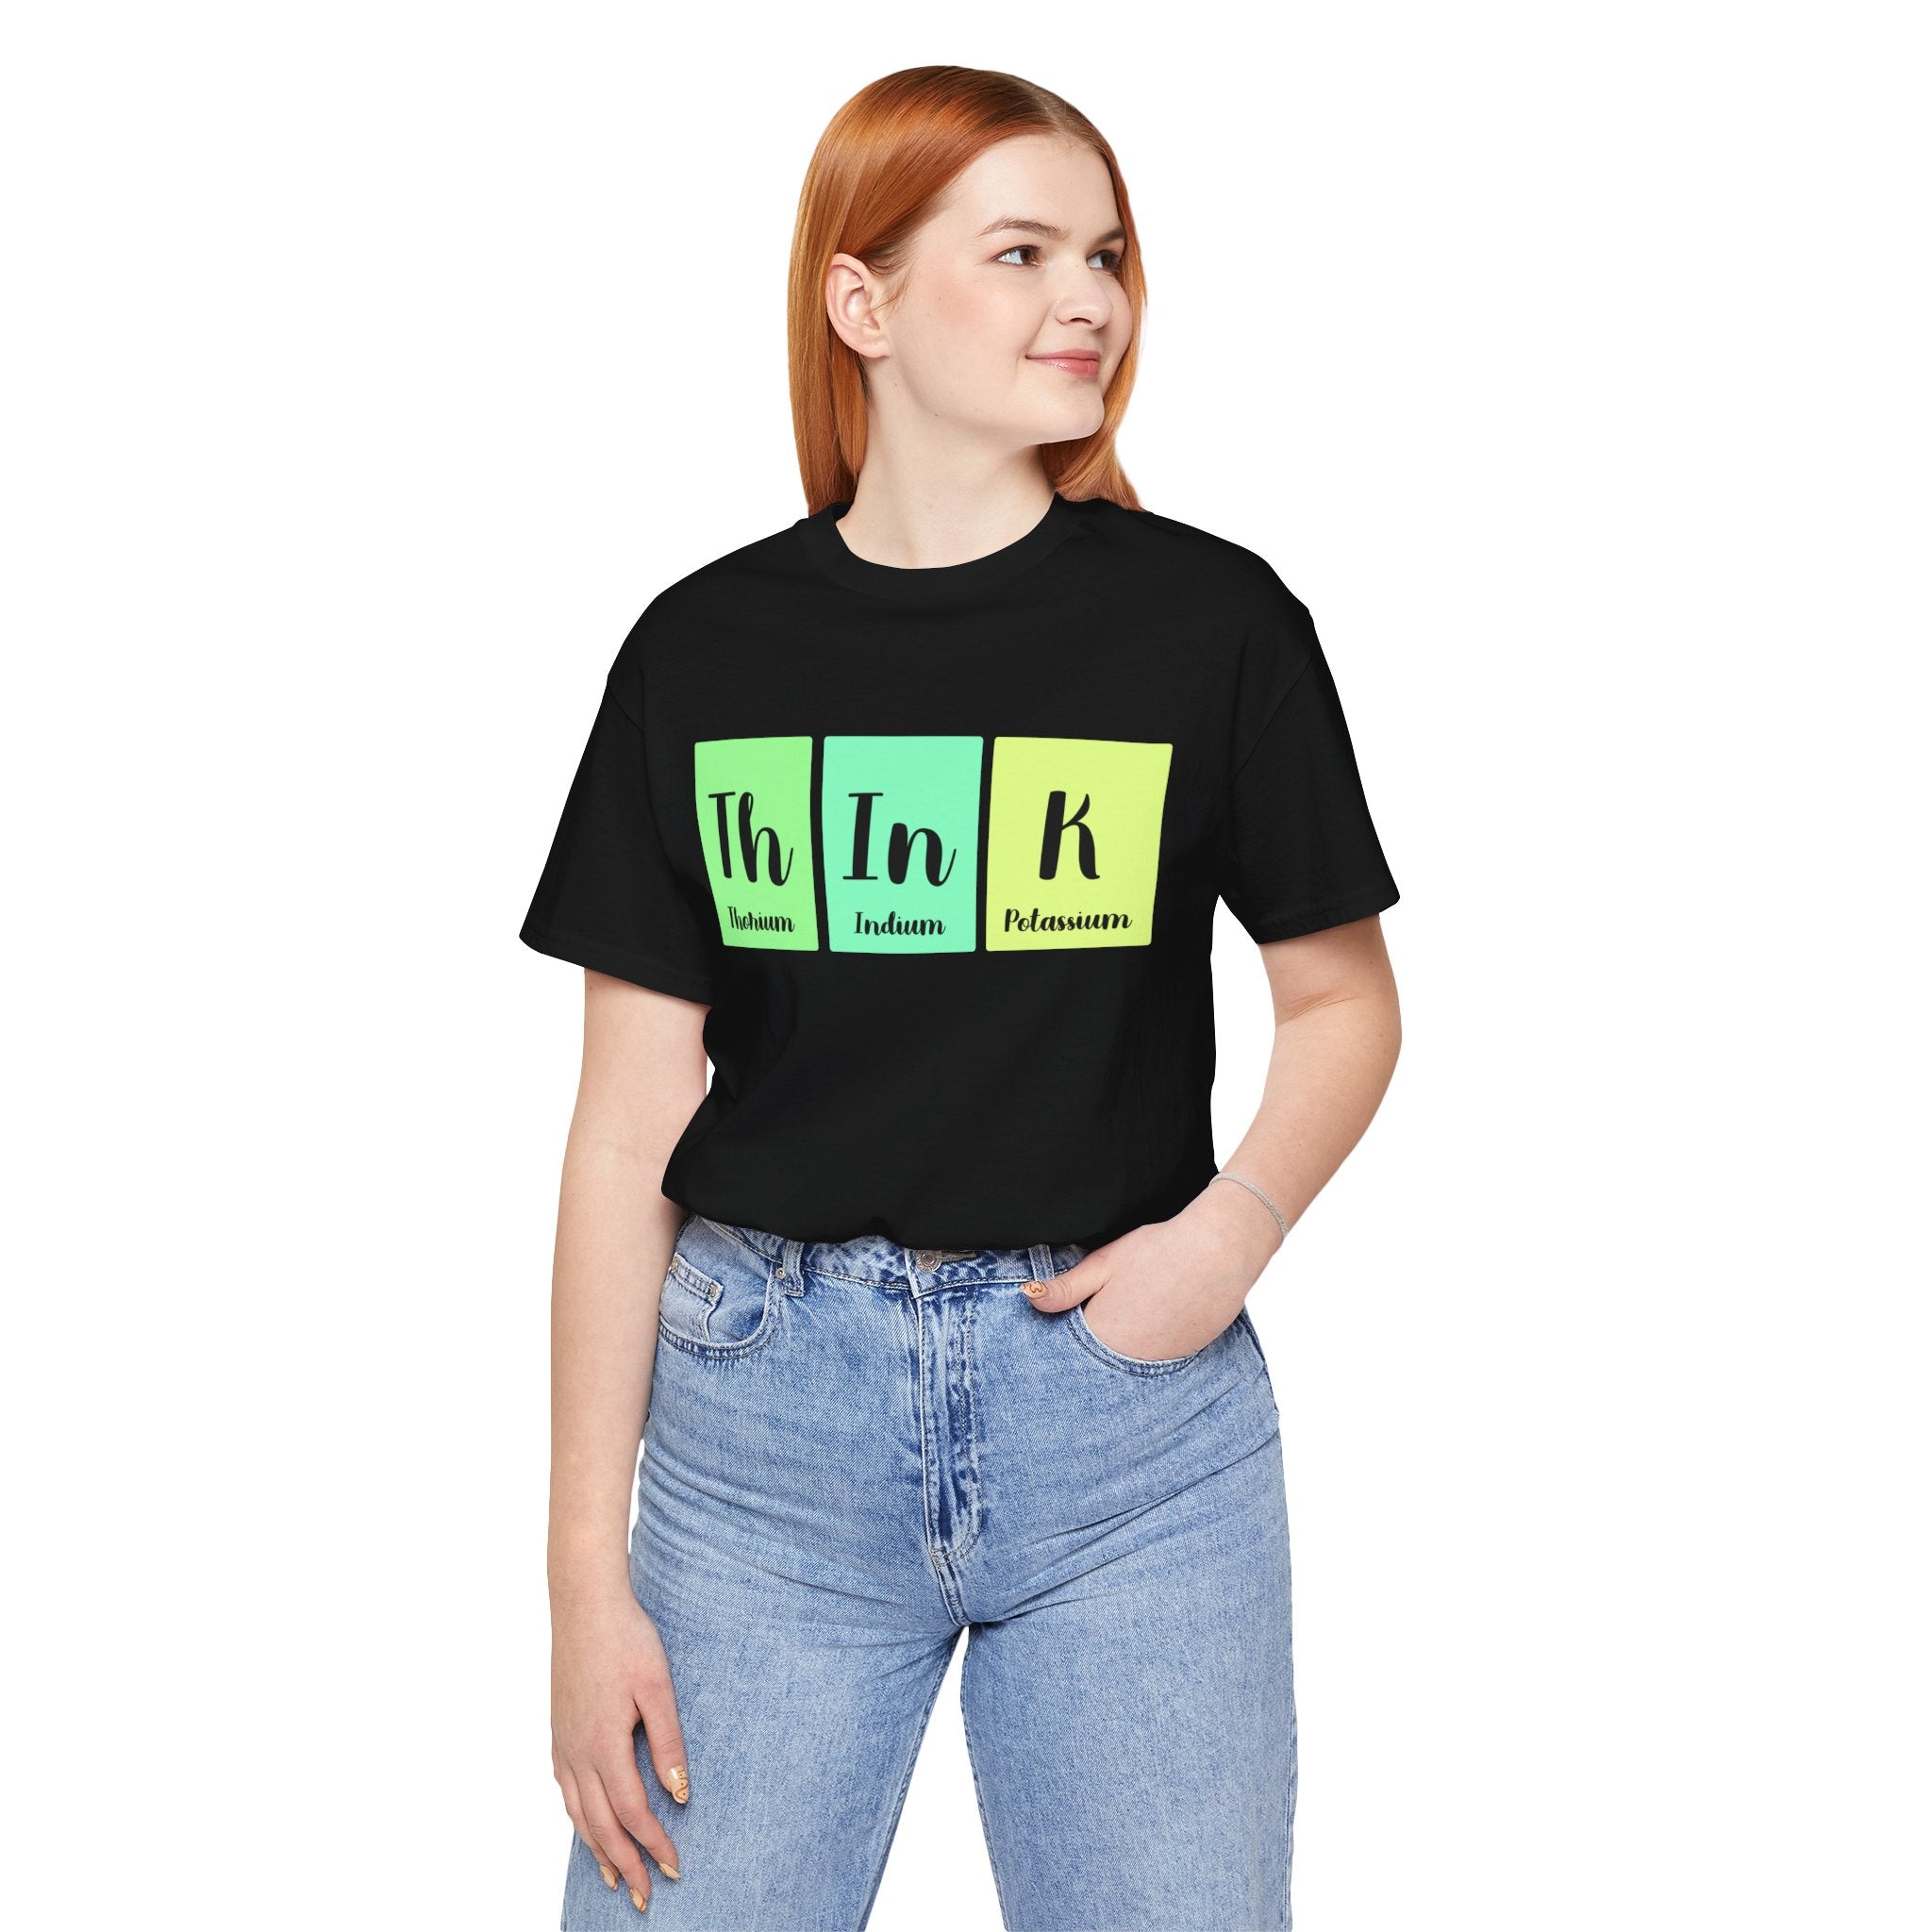 Sentence with Product Name: Woman wearing a black unisex Th-In-k jersey tee with "th in k" printed in green and black, representing chemical elements thorium, indium, and potassium, standing with hands in jeans pockets.